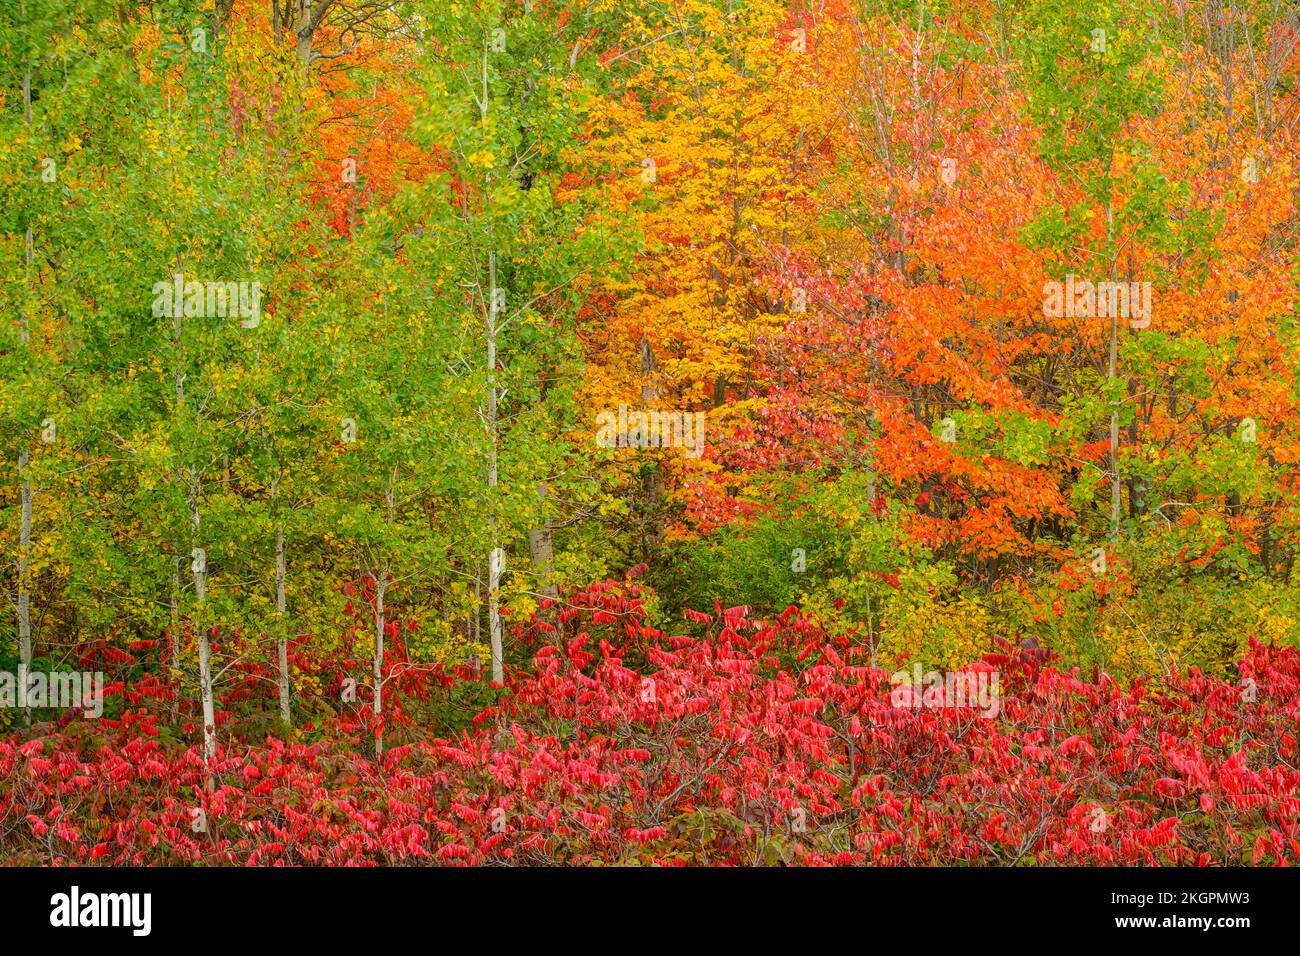 Autumn red maple and staghorn sumac foliage with poplar trees, Greater Sudbury, Ontario, Canada Stock Photo